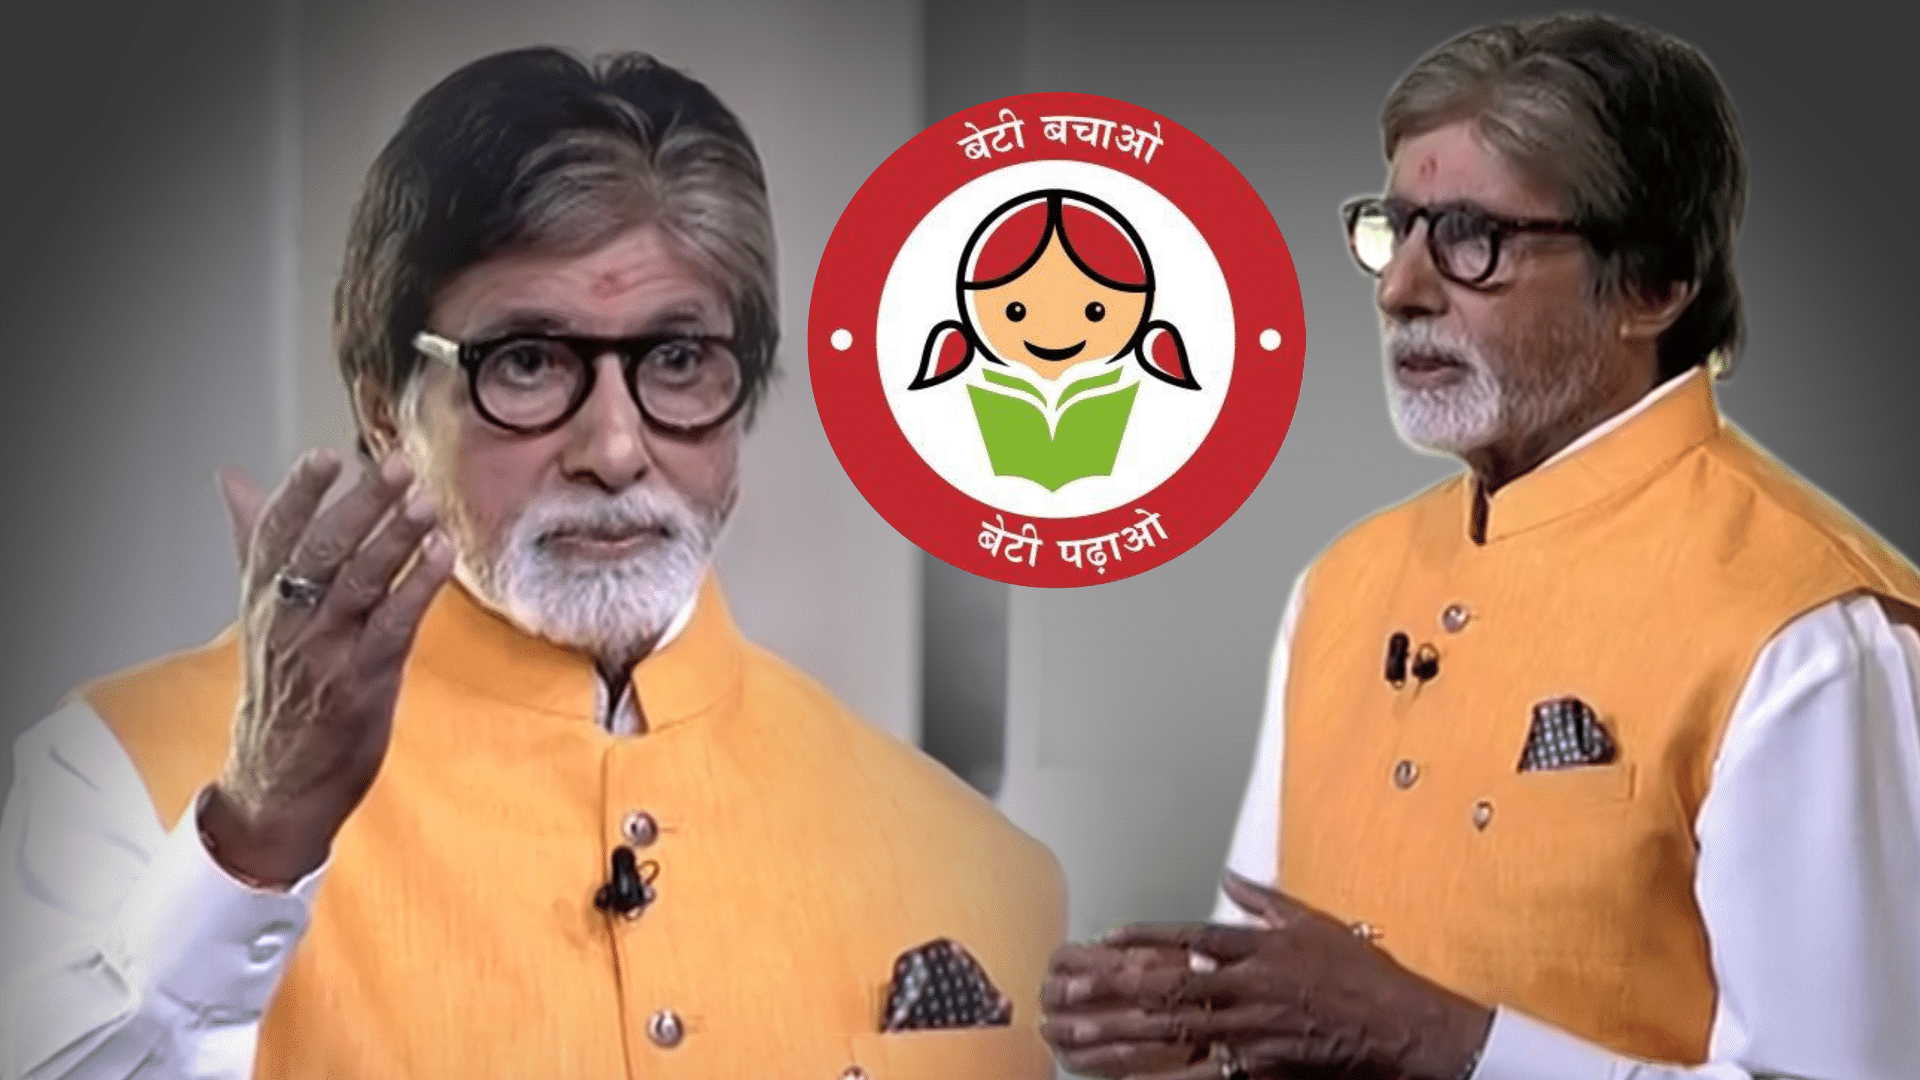 Amitabh Bachchan at the ‘Ek Nayi Subah’ function at India Gate, New Delhi. (Image altered by The Quint)